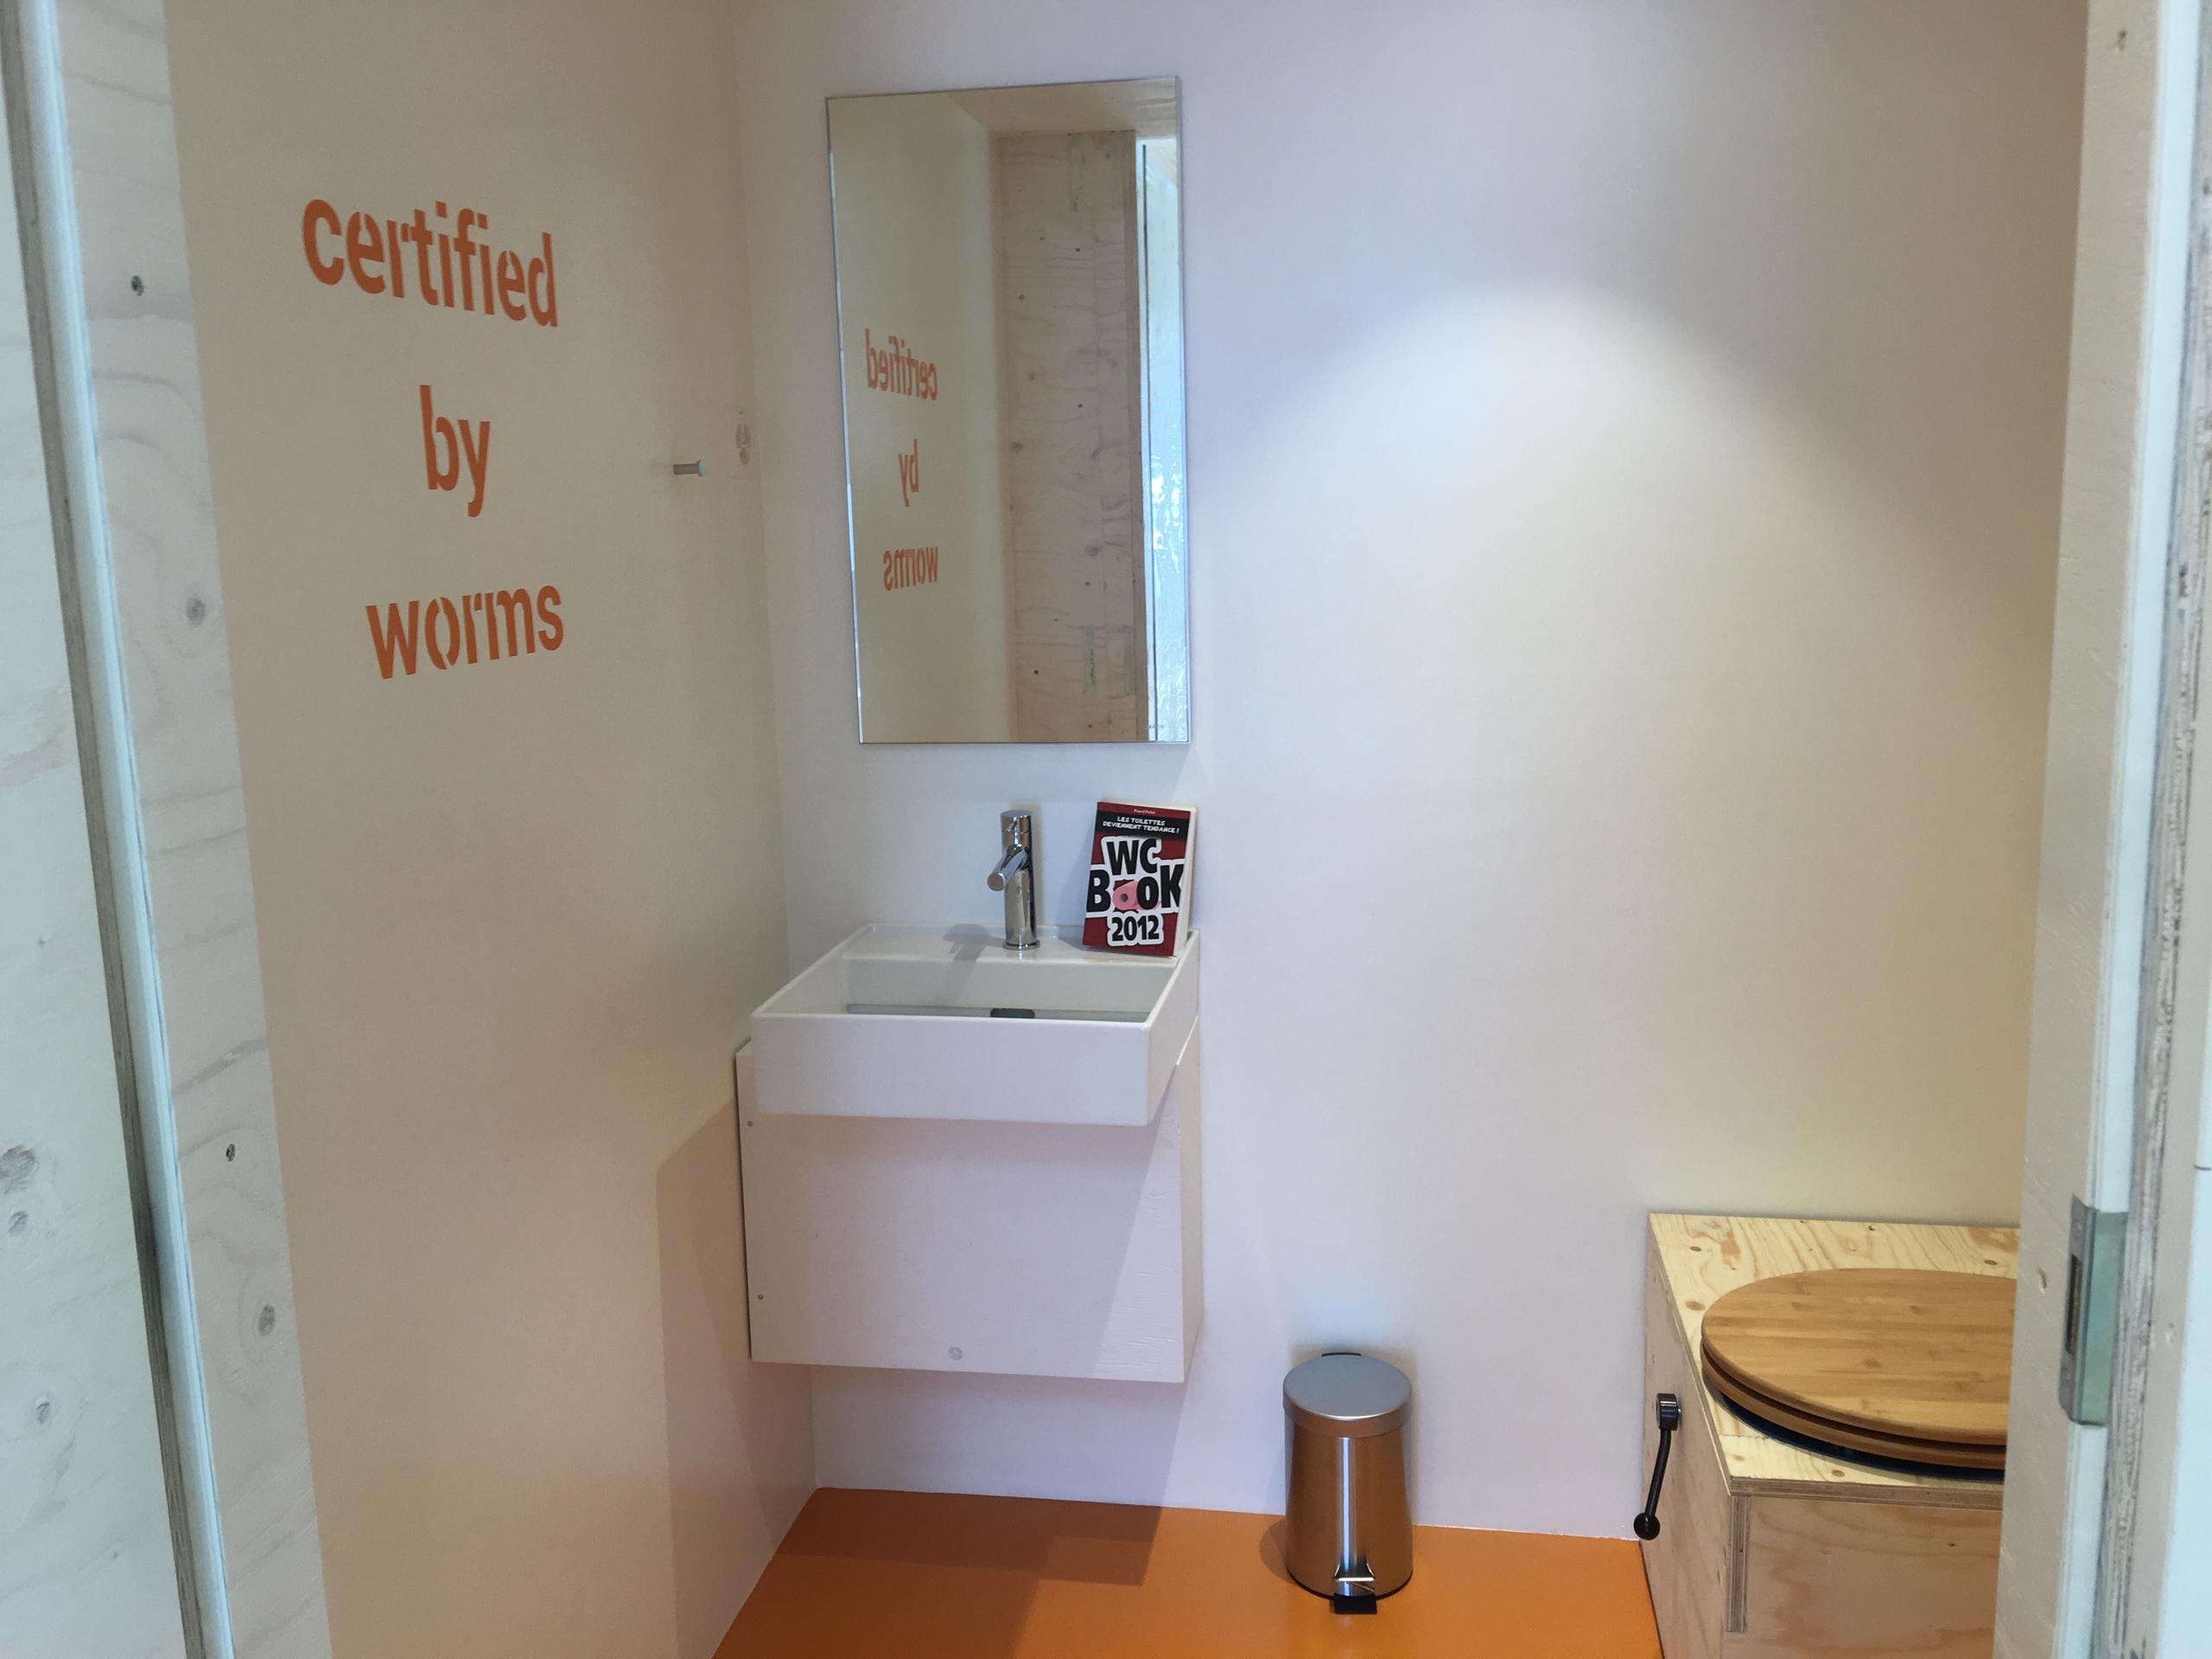 A sign in the bathroom says certified by worms